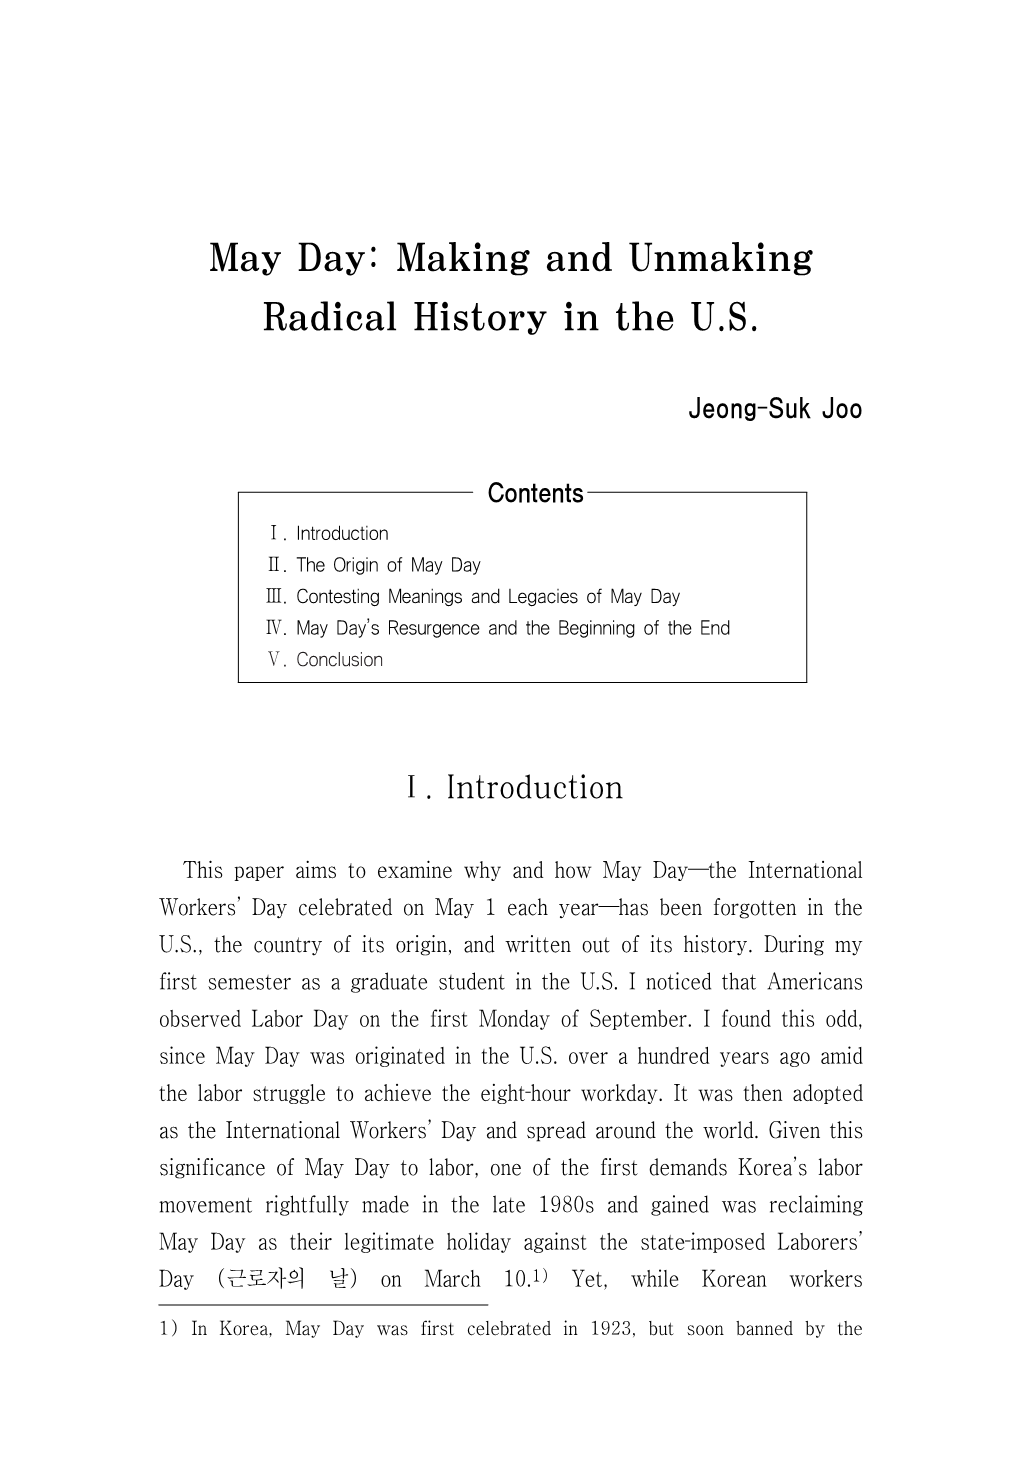 May Day: Making and Unmaking Radical History in the U.S